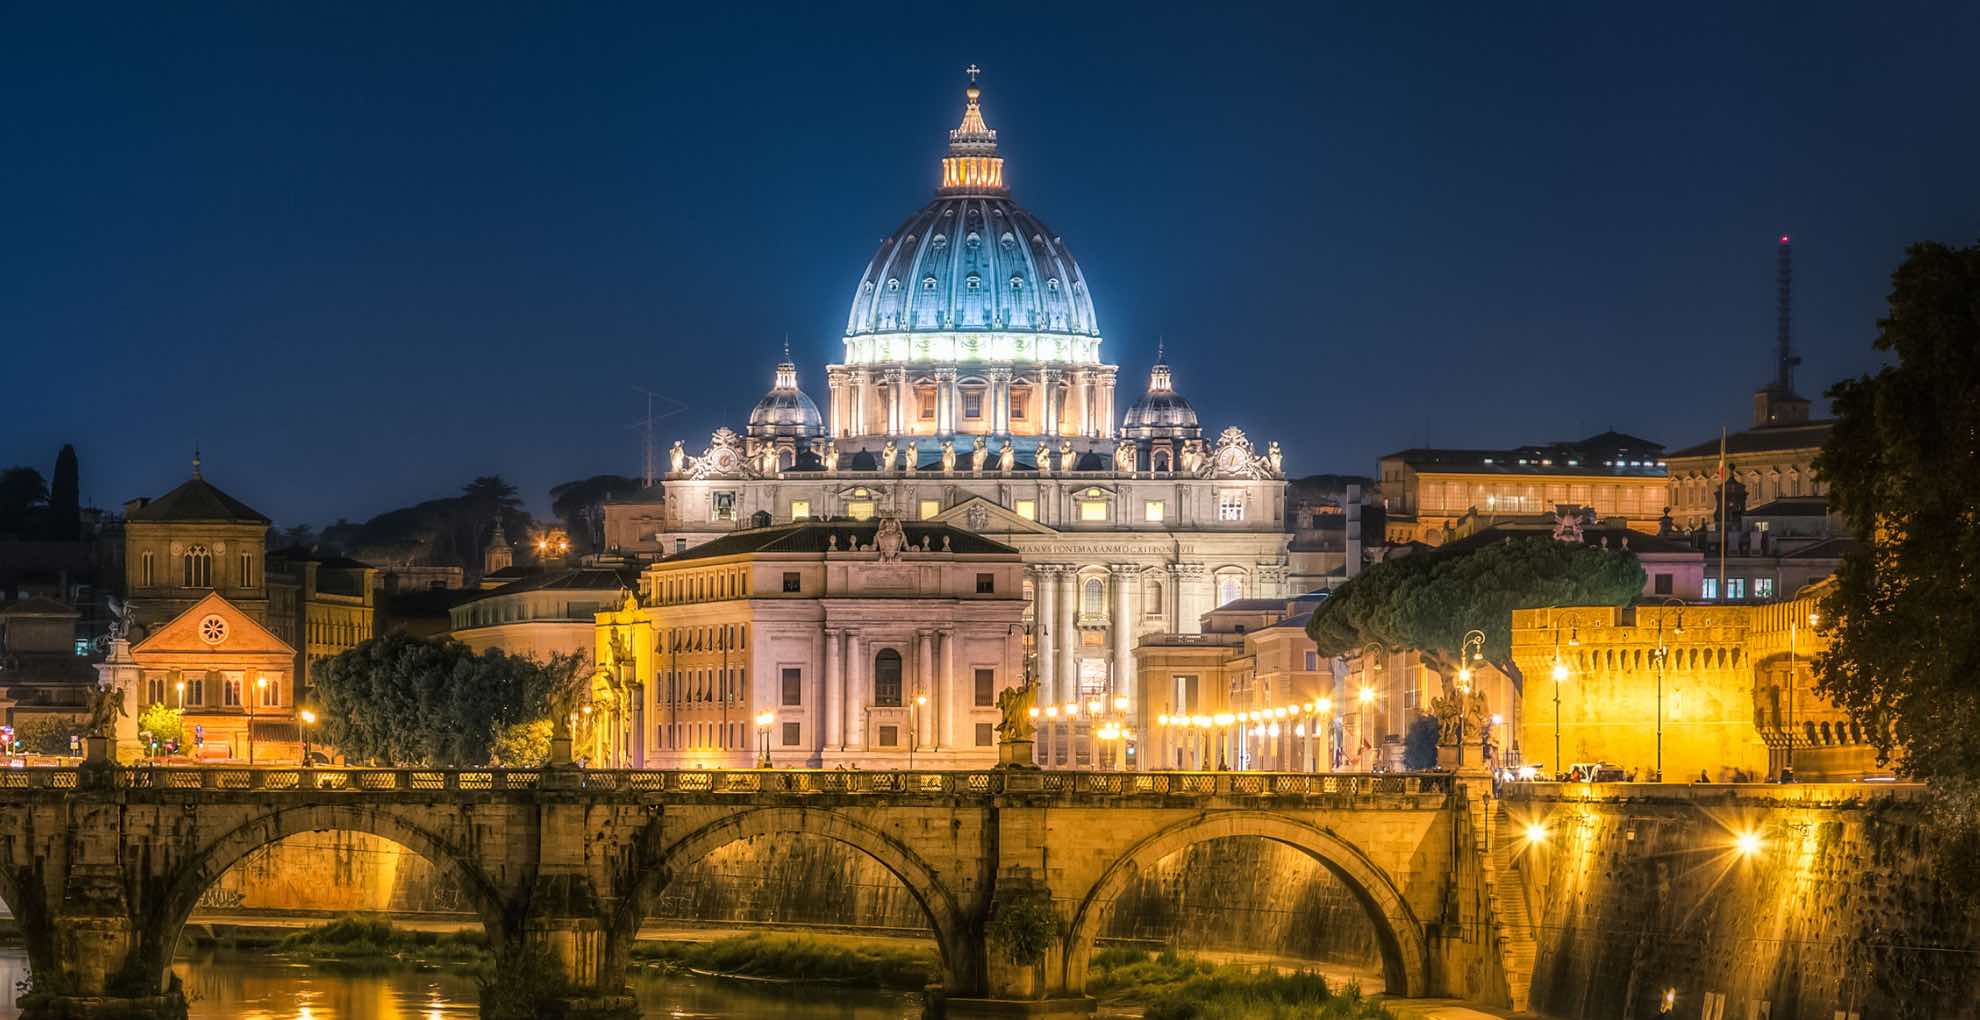 St. Peter's Basilica at night in Vatican City